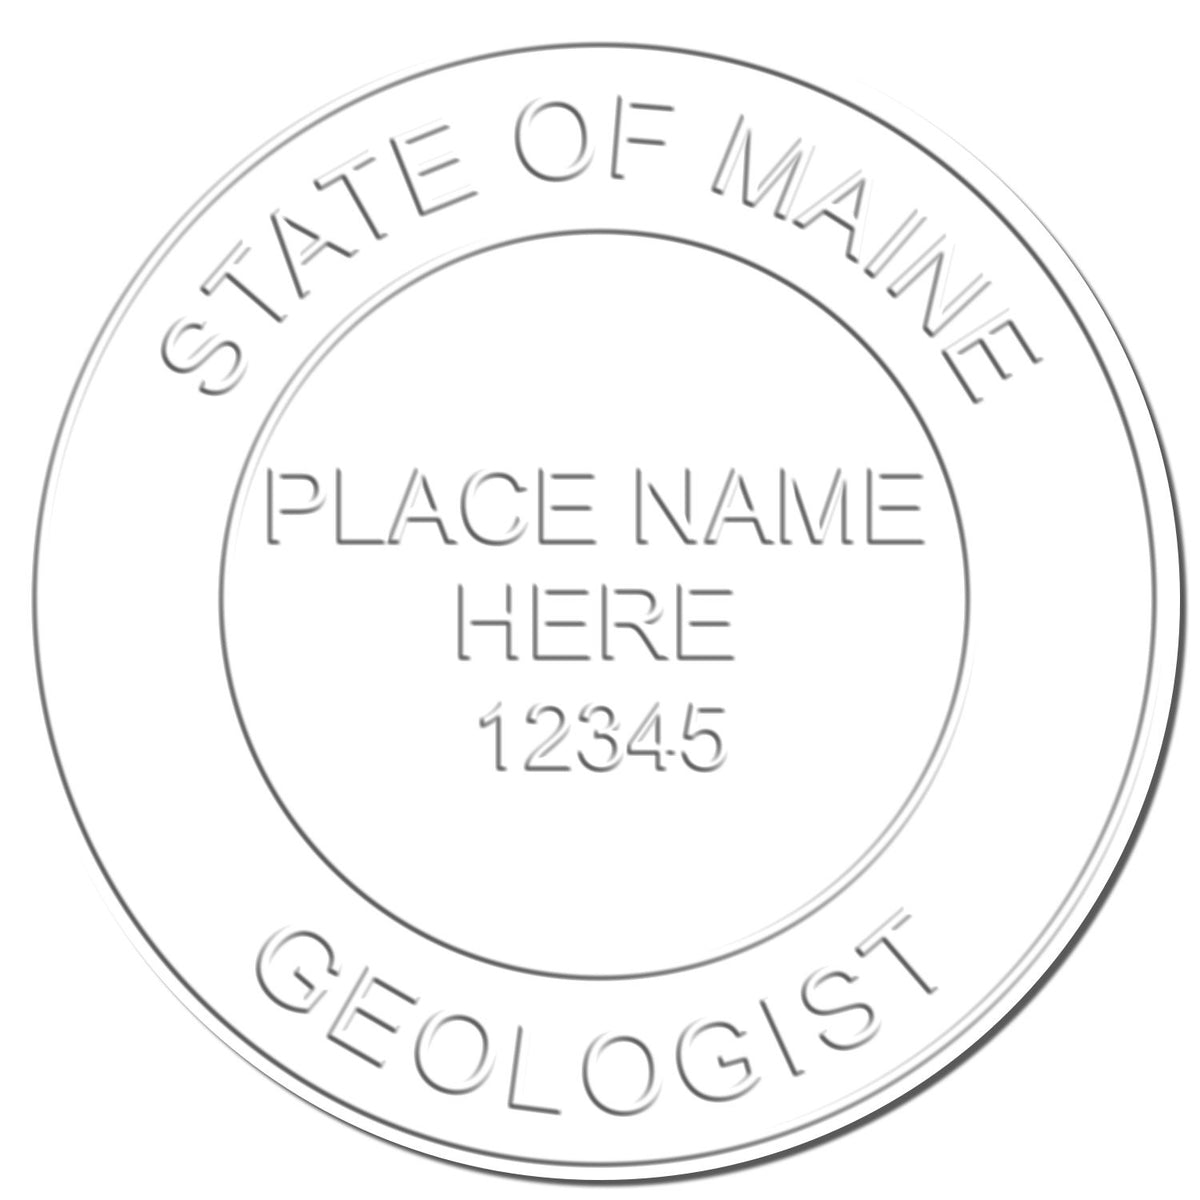 A photograph of the Hybrid Maine Geologist Seal stamp impression reveals a vivid, professional image of the on paper.